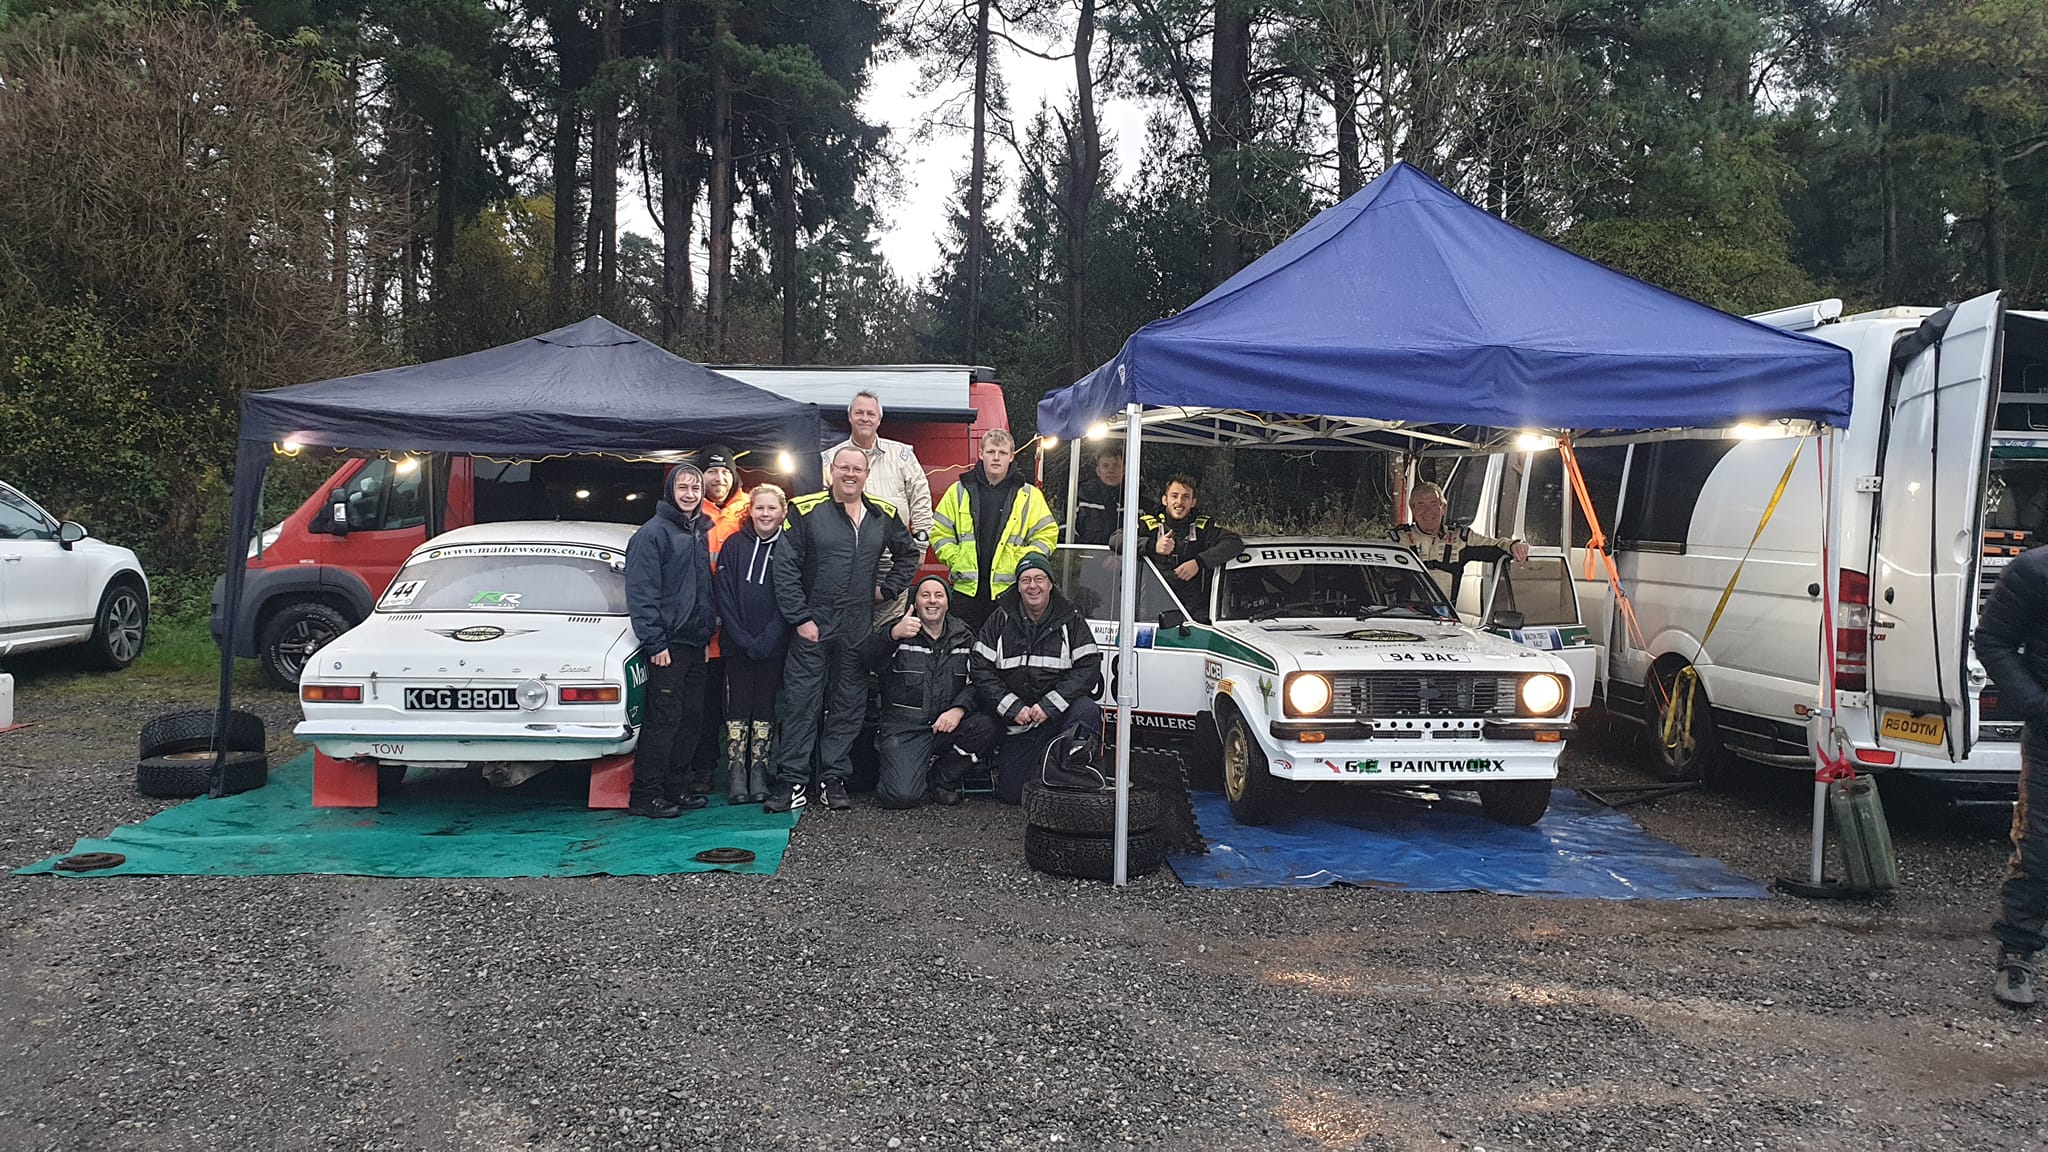 Brilliant weekend on the Malton Forest Rally